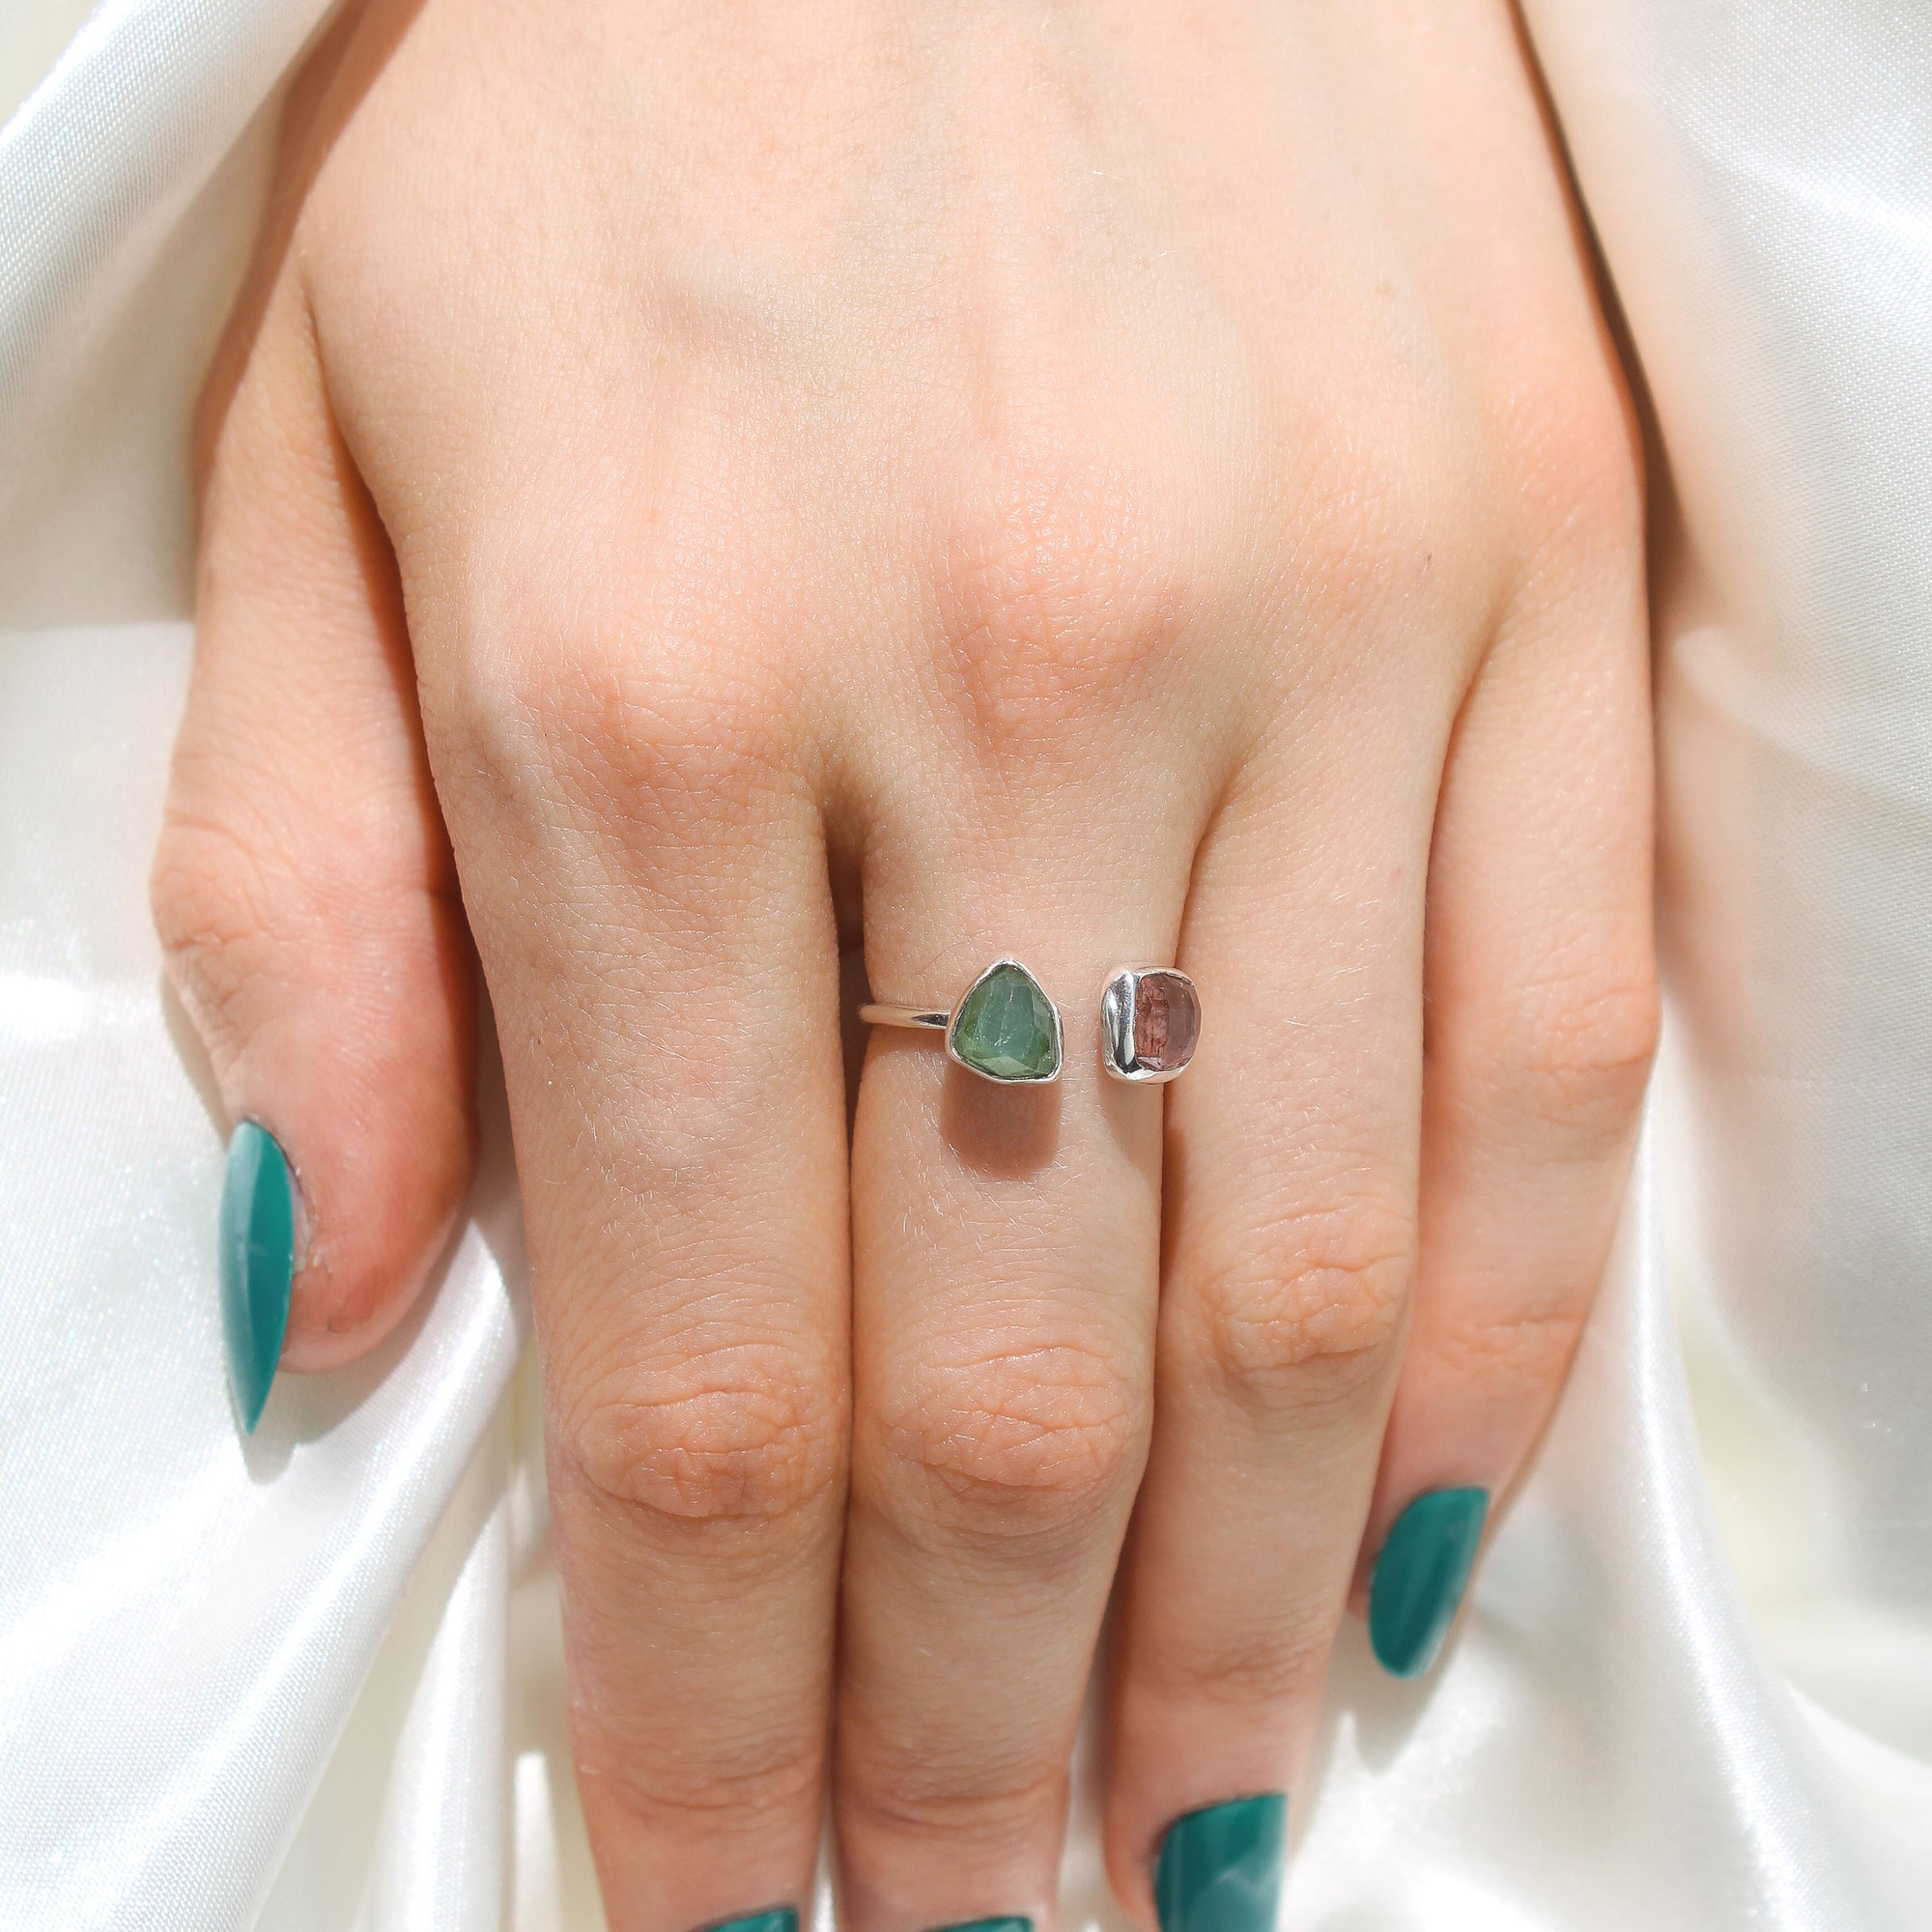 Pink and Green Tourmaline Adjustable Ring - Size 5